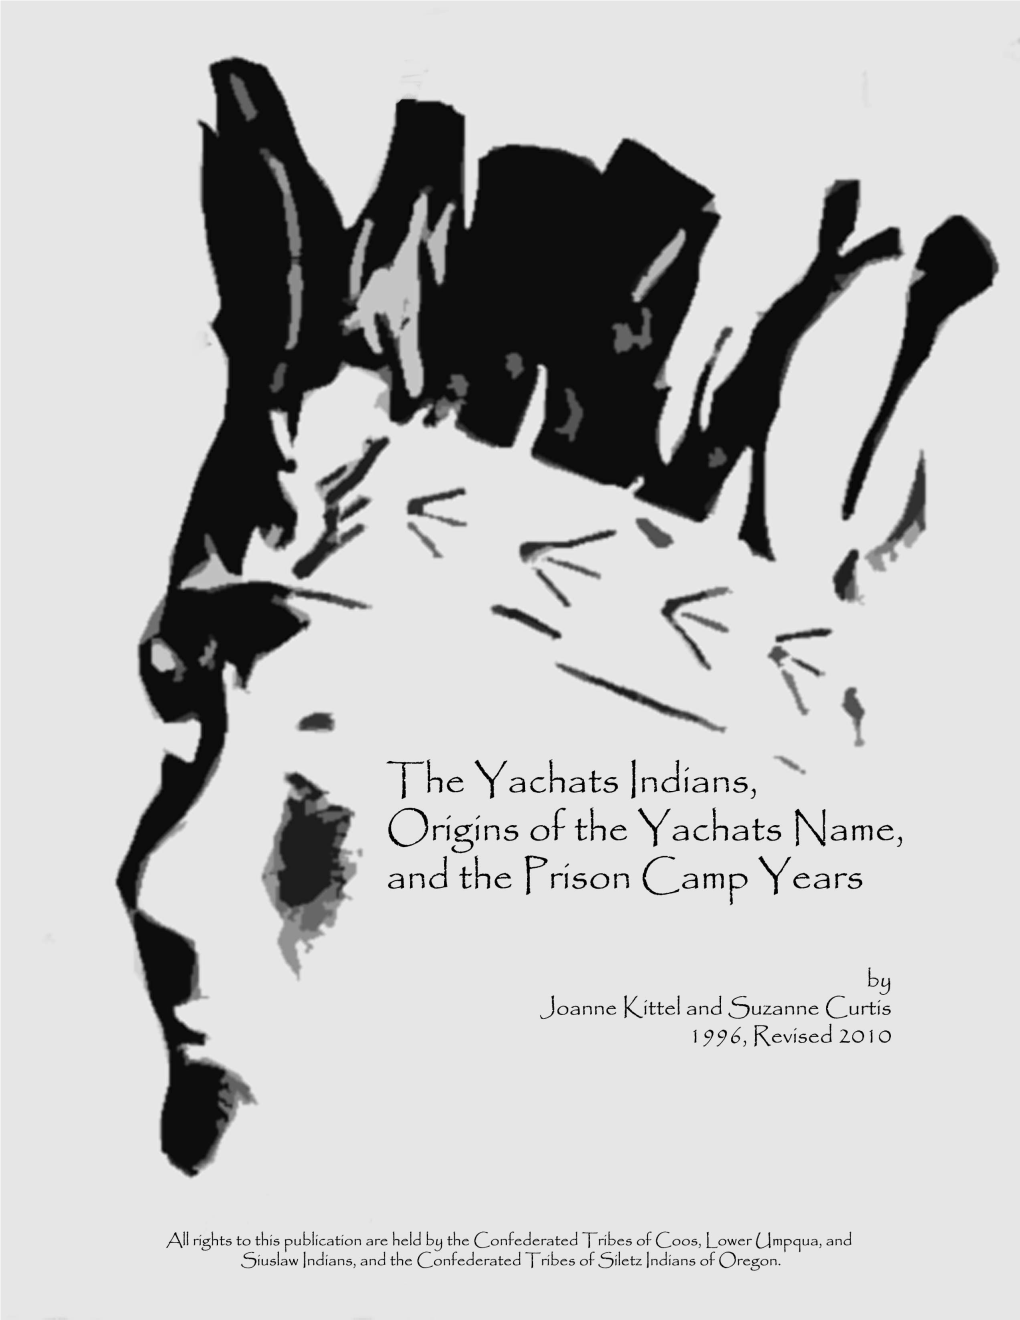 Yachats Indians, Origin of the Yachats Name and The